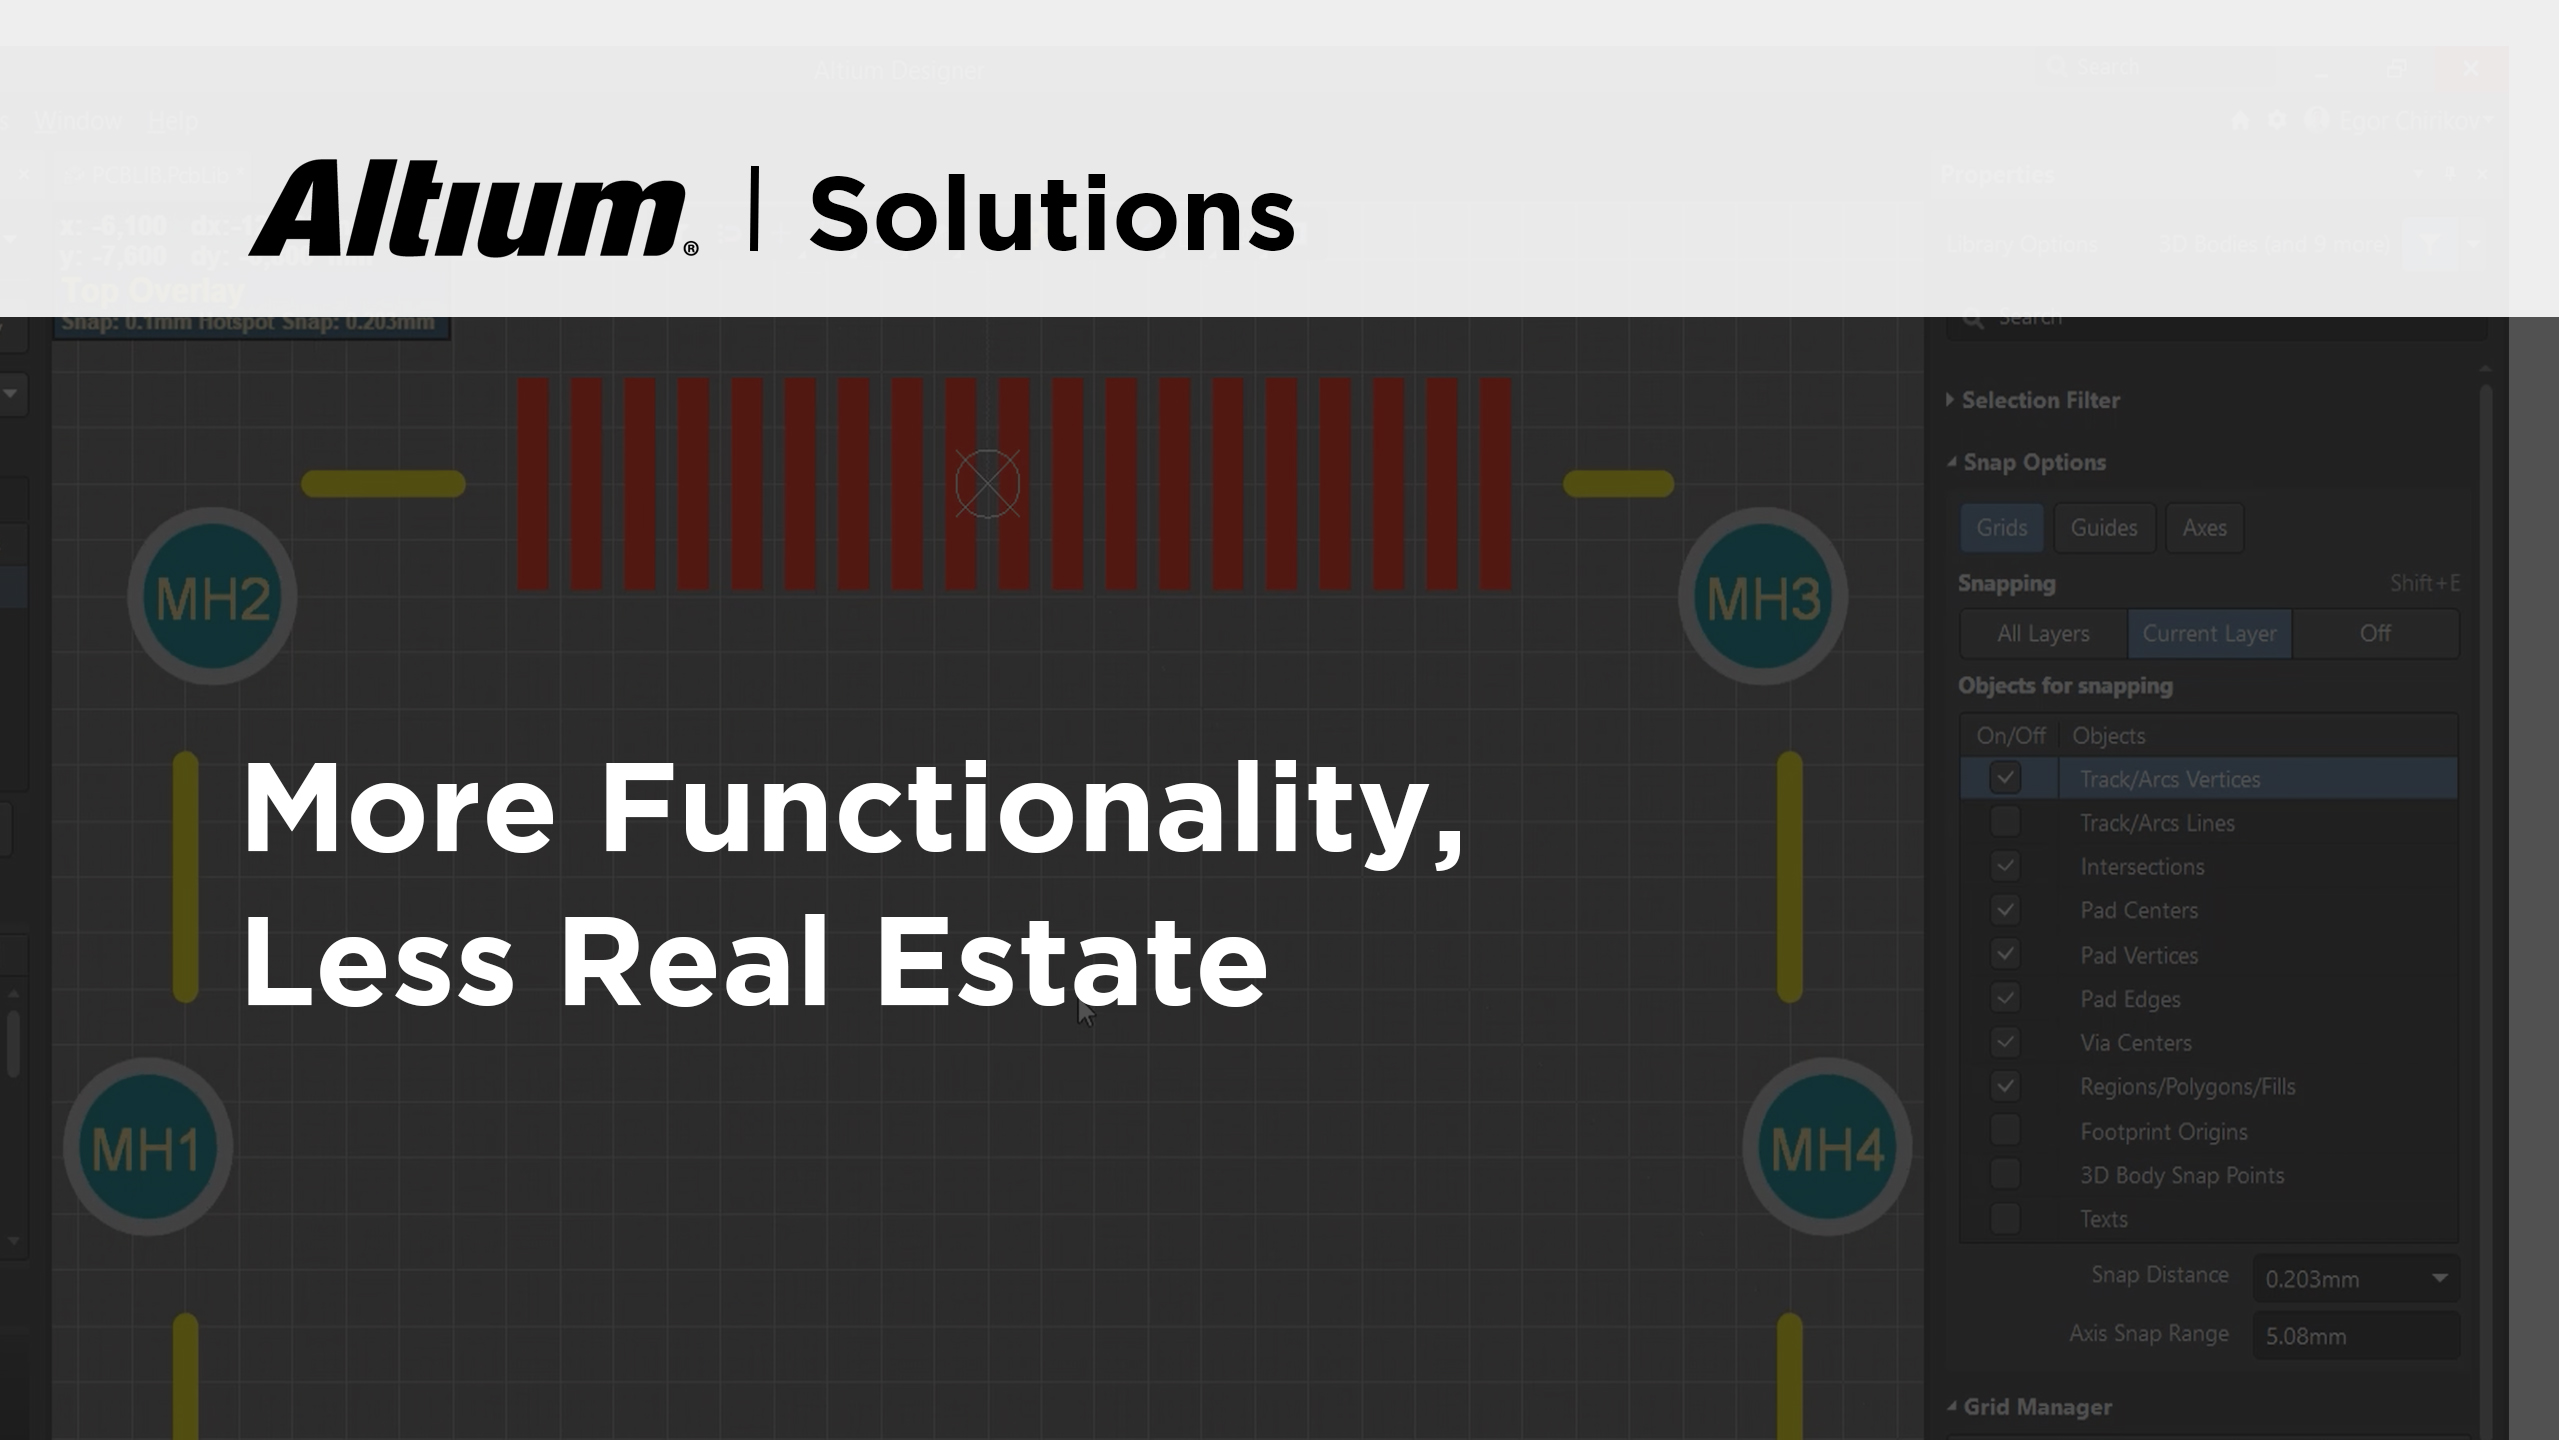 More Functionality, Less Real Estate